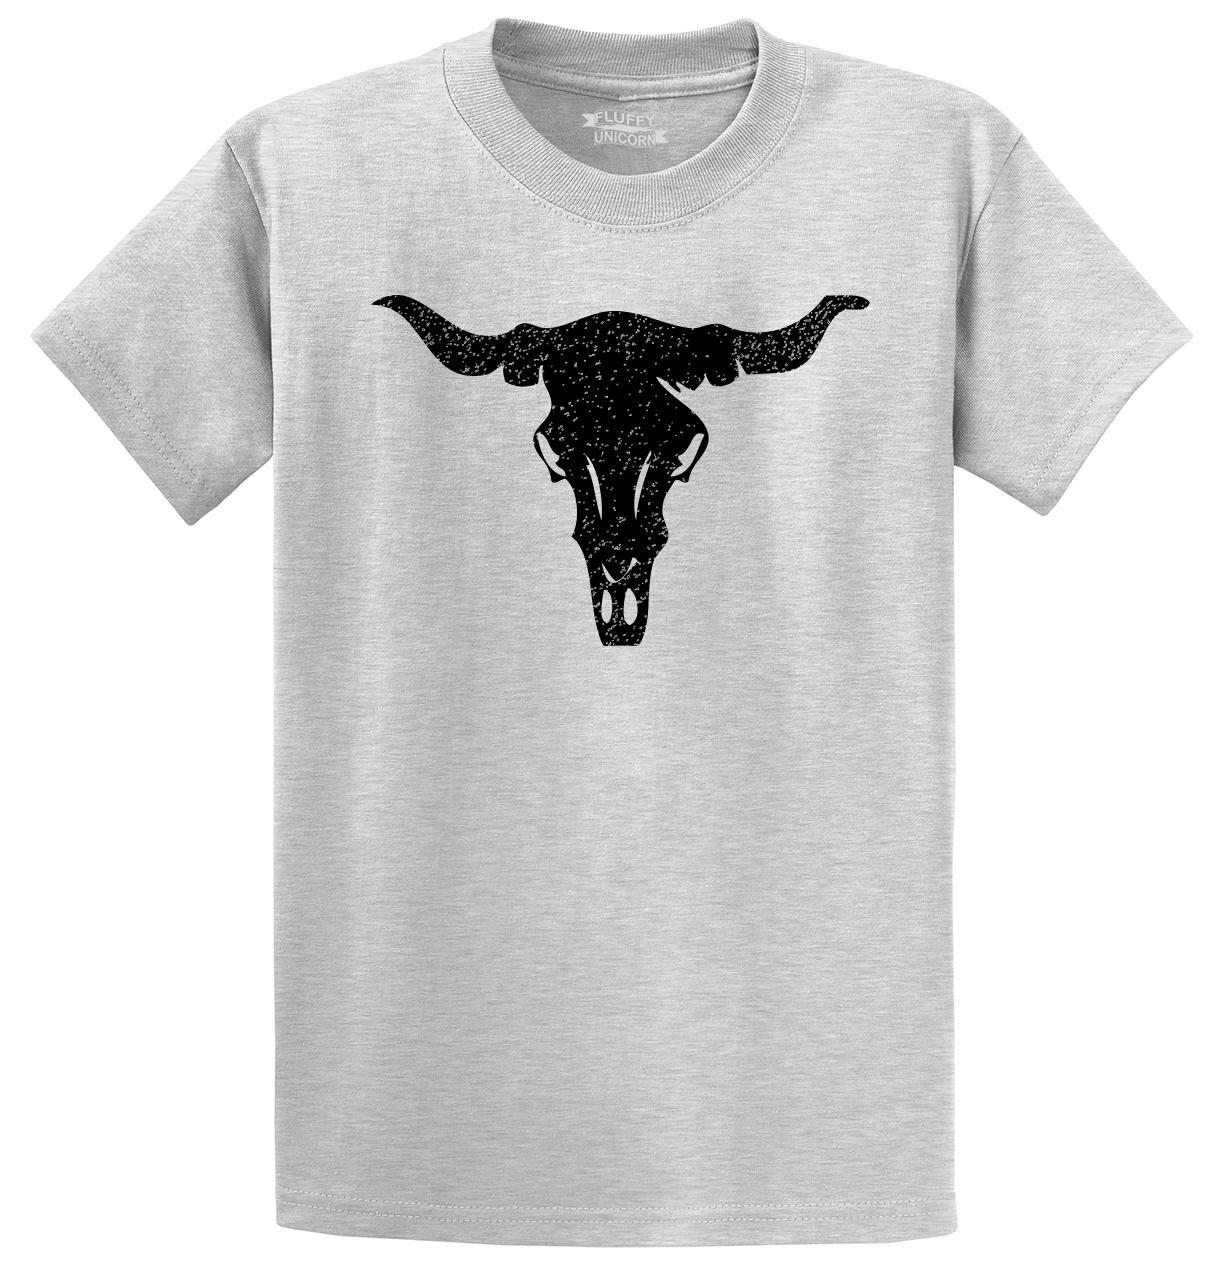 Distressed Longhorn T Shirt Country Cow Skull Graphic Tee | eBay